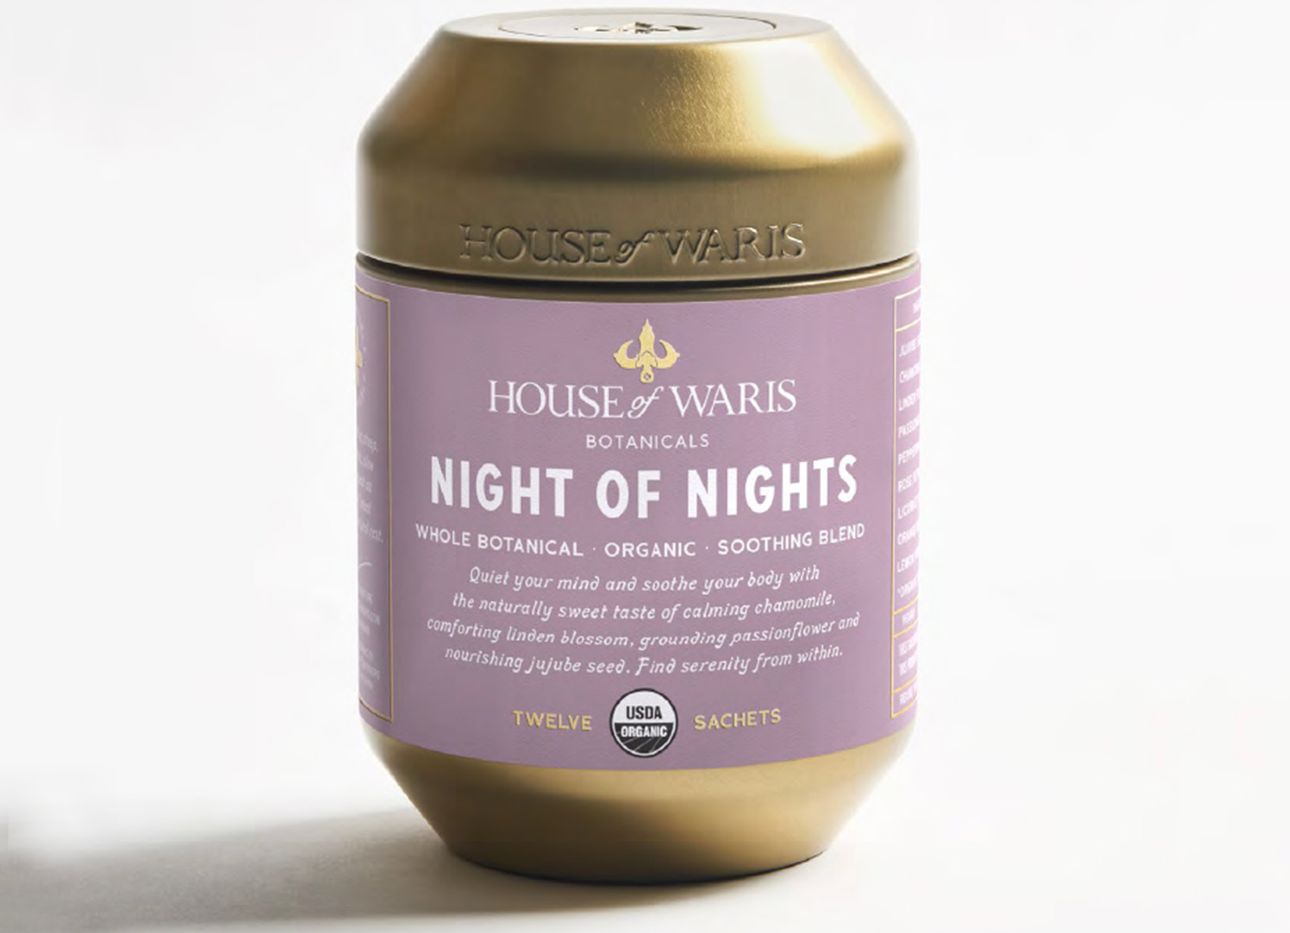 A purple and gold canister of House of Waris Night of Nights tea.